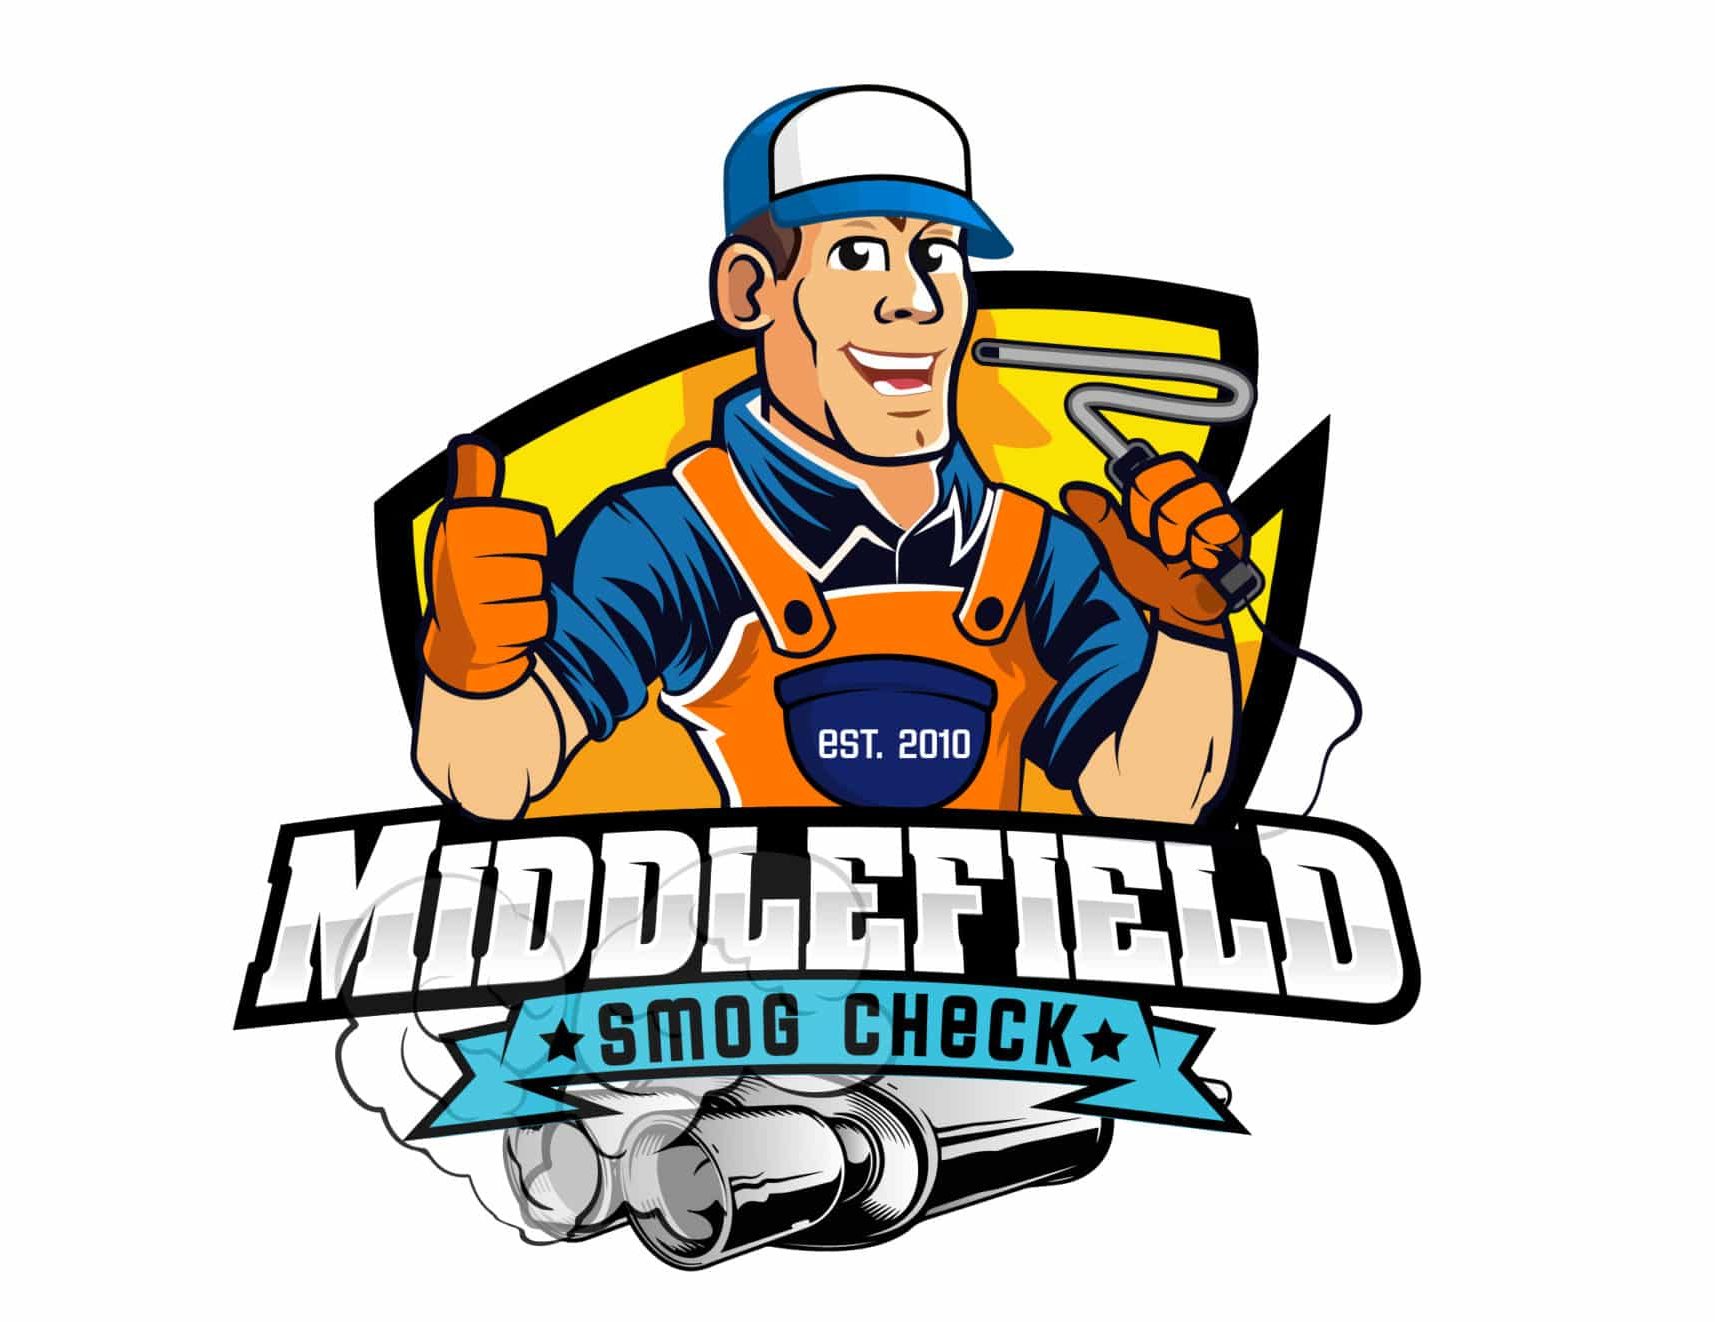 Middlefield Smog Check-STAR CERTIFIED